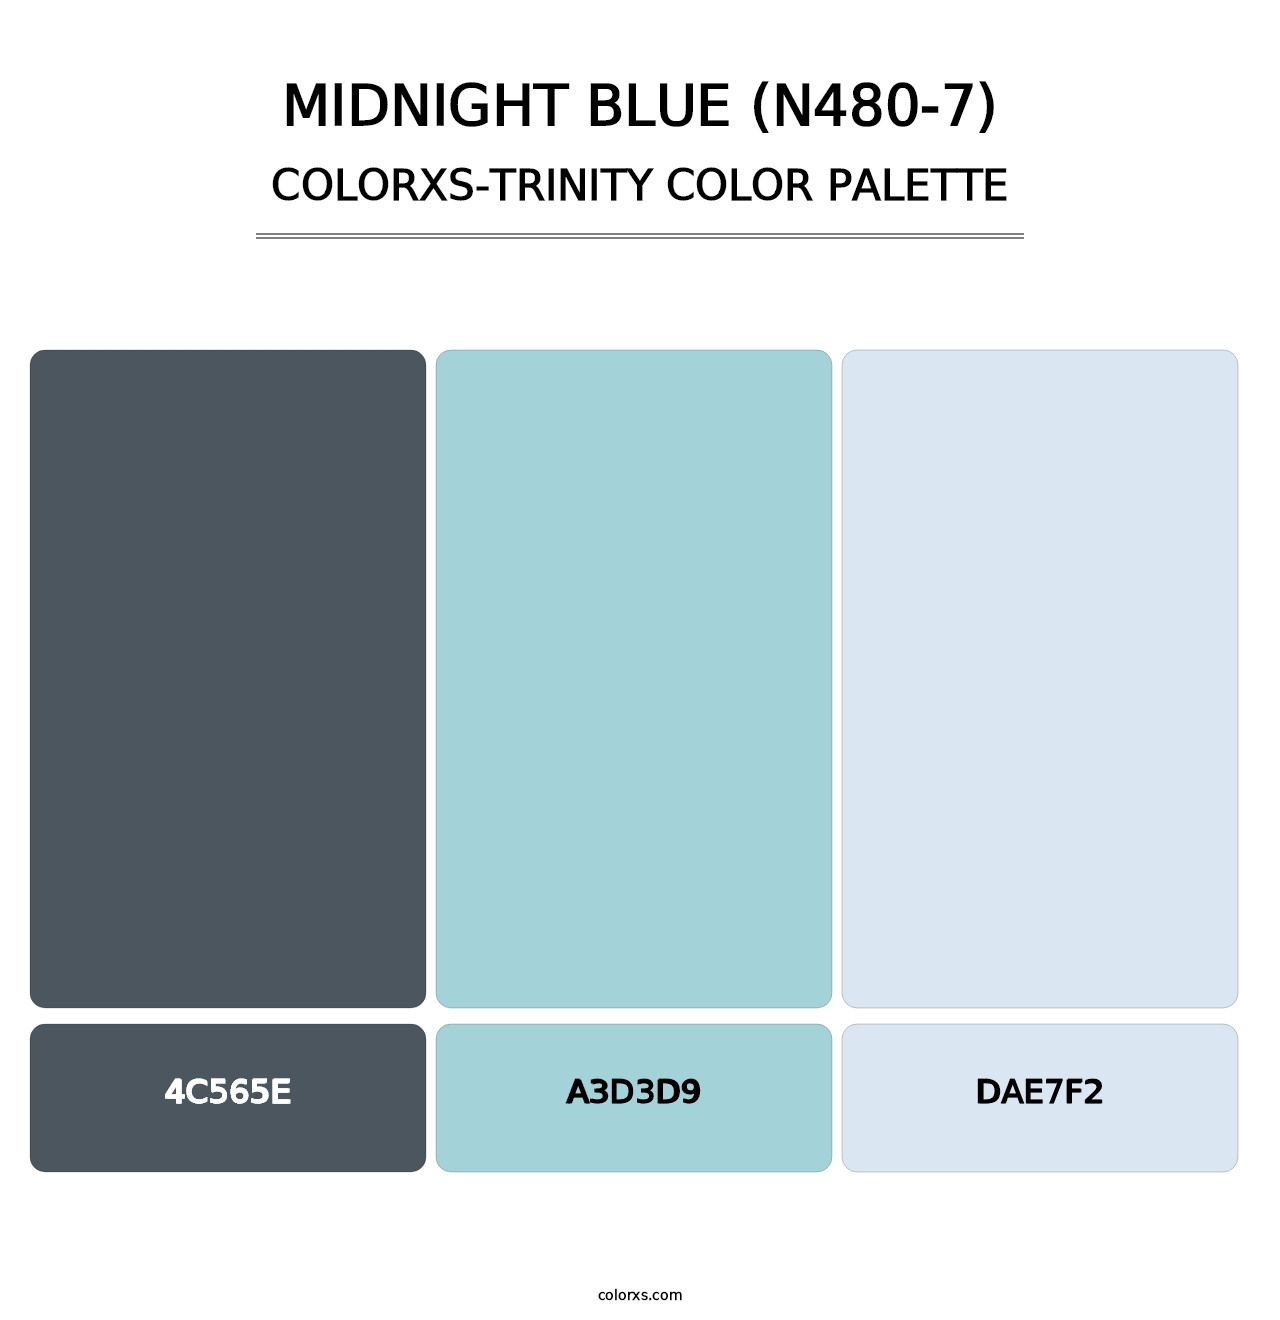 Midnight Blue (N480-7) - Colorxs Trinity Palette